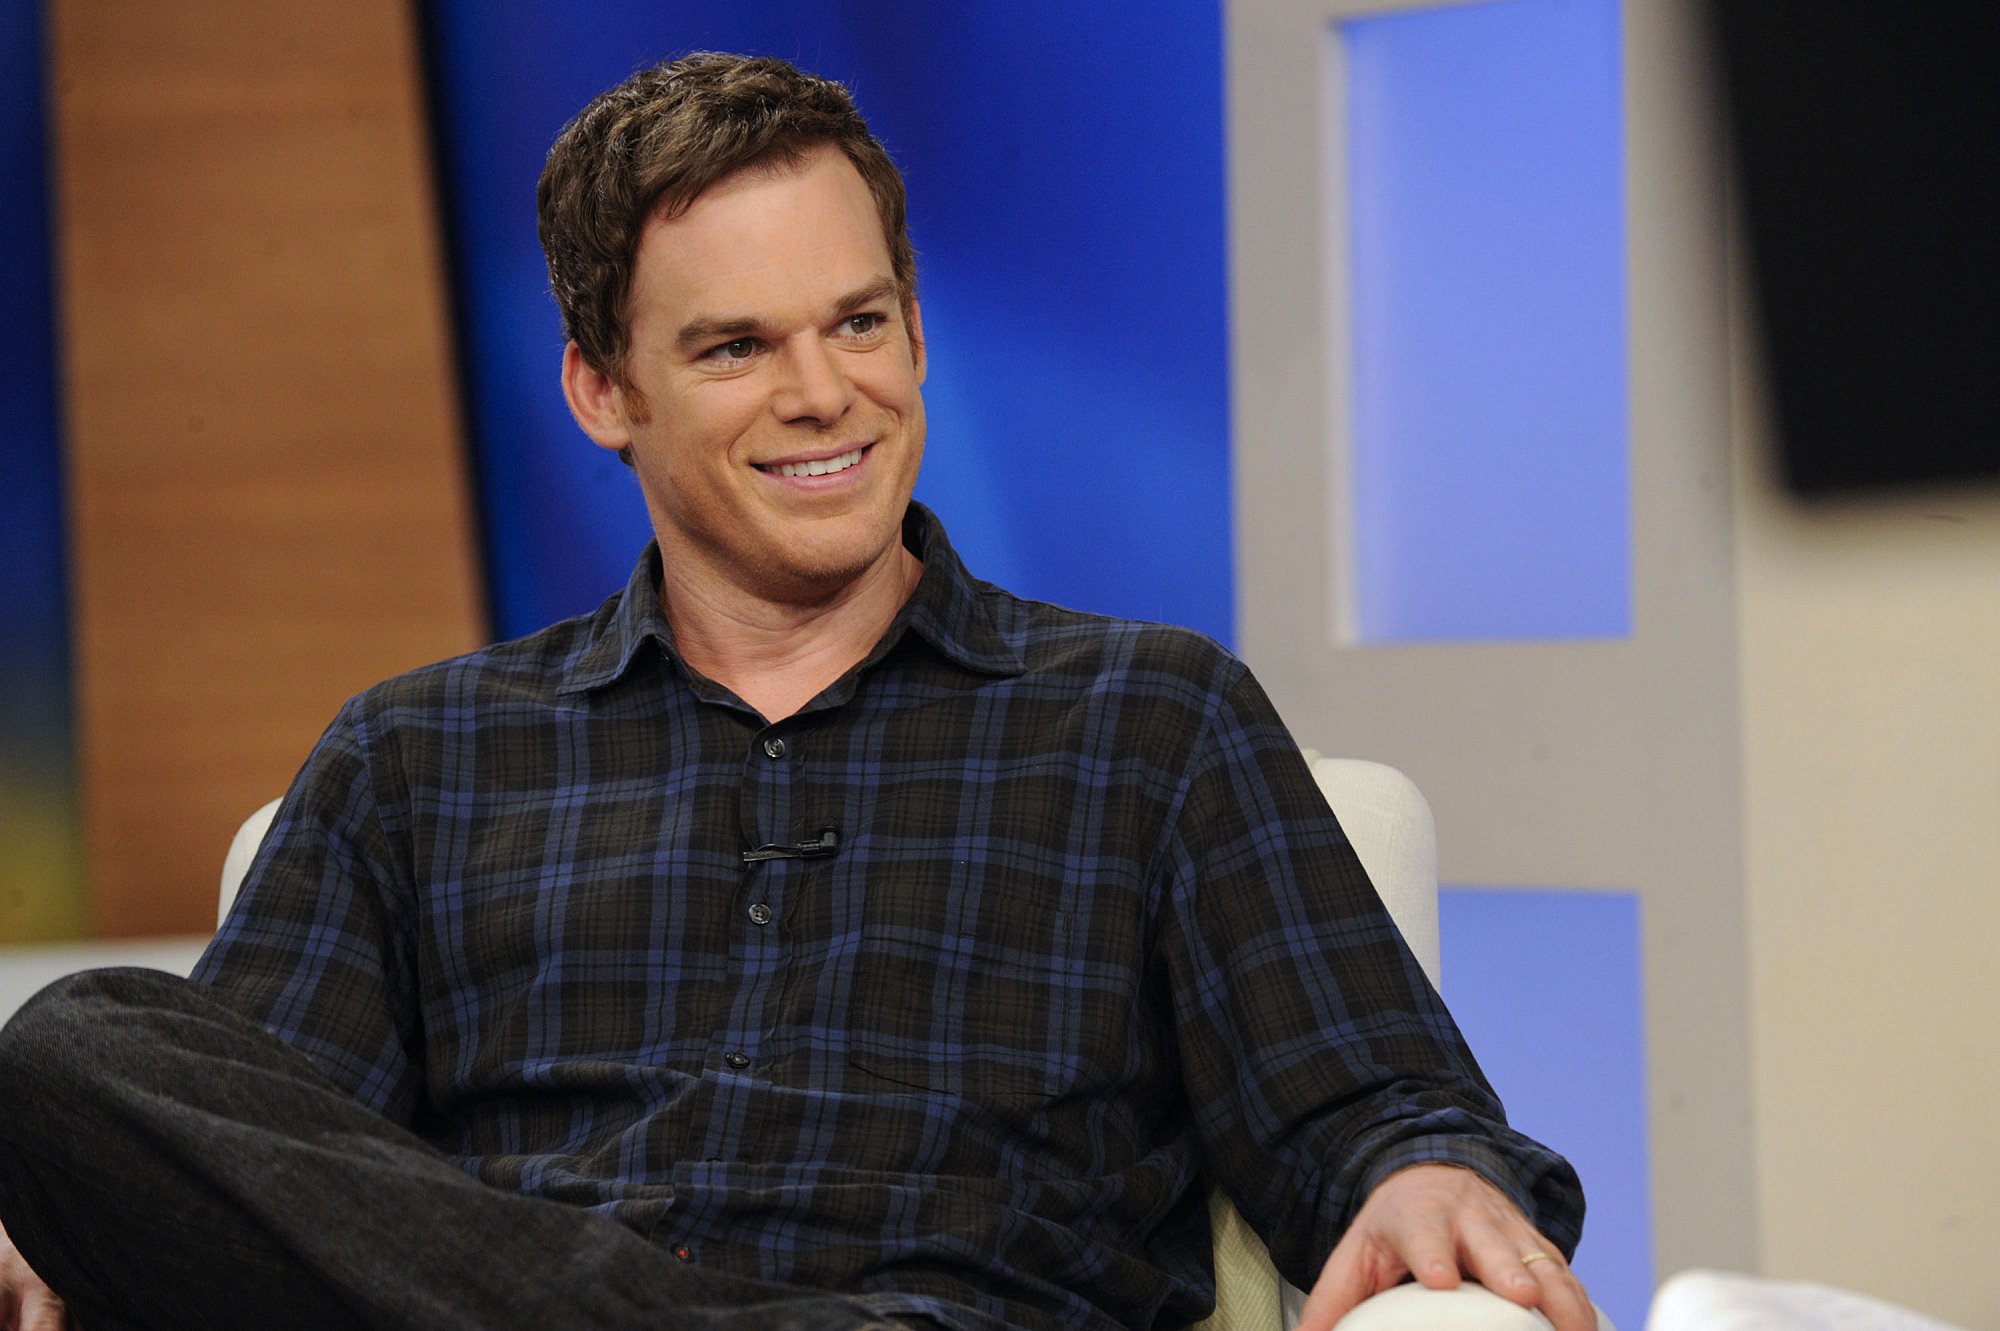 Michael C. Hall on The Early Show on Monday, September 27, 2010 | Source: Getty Images